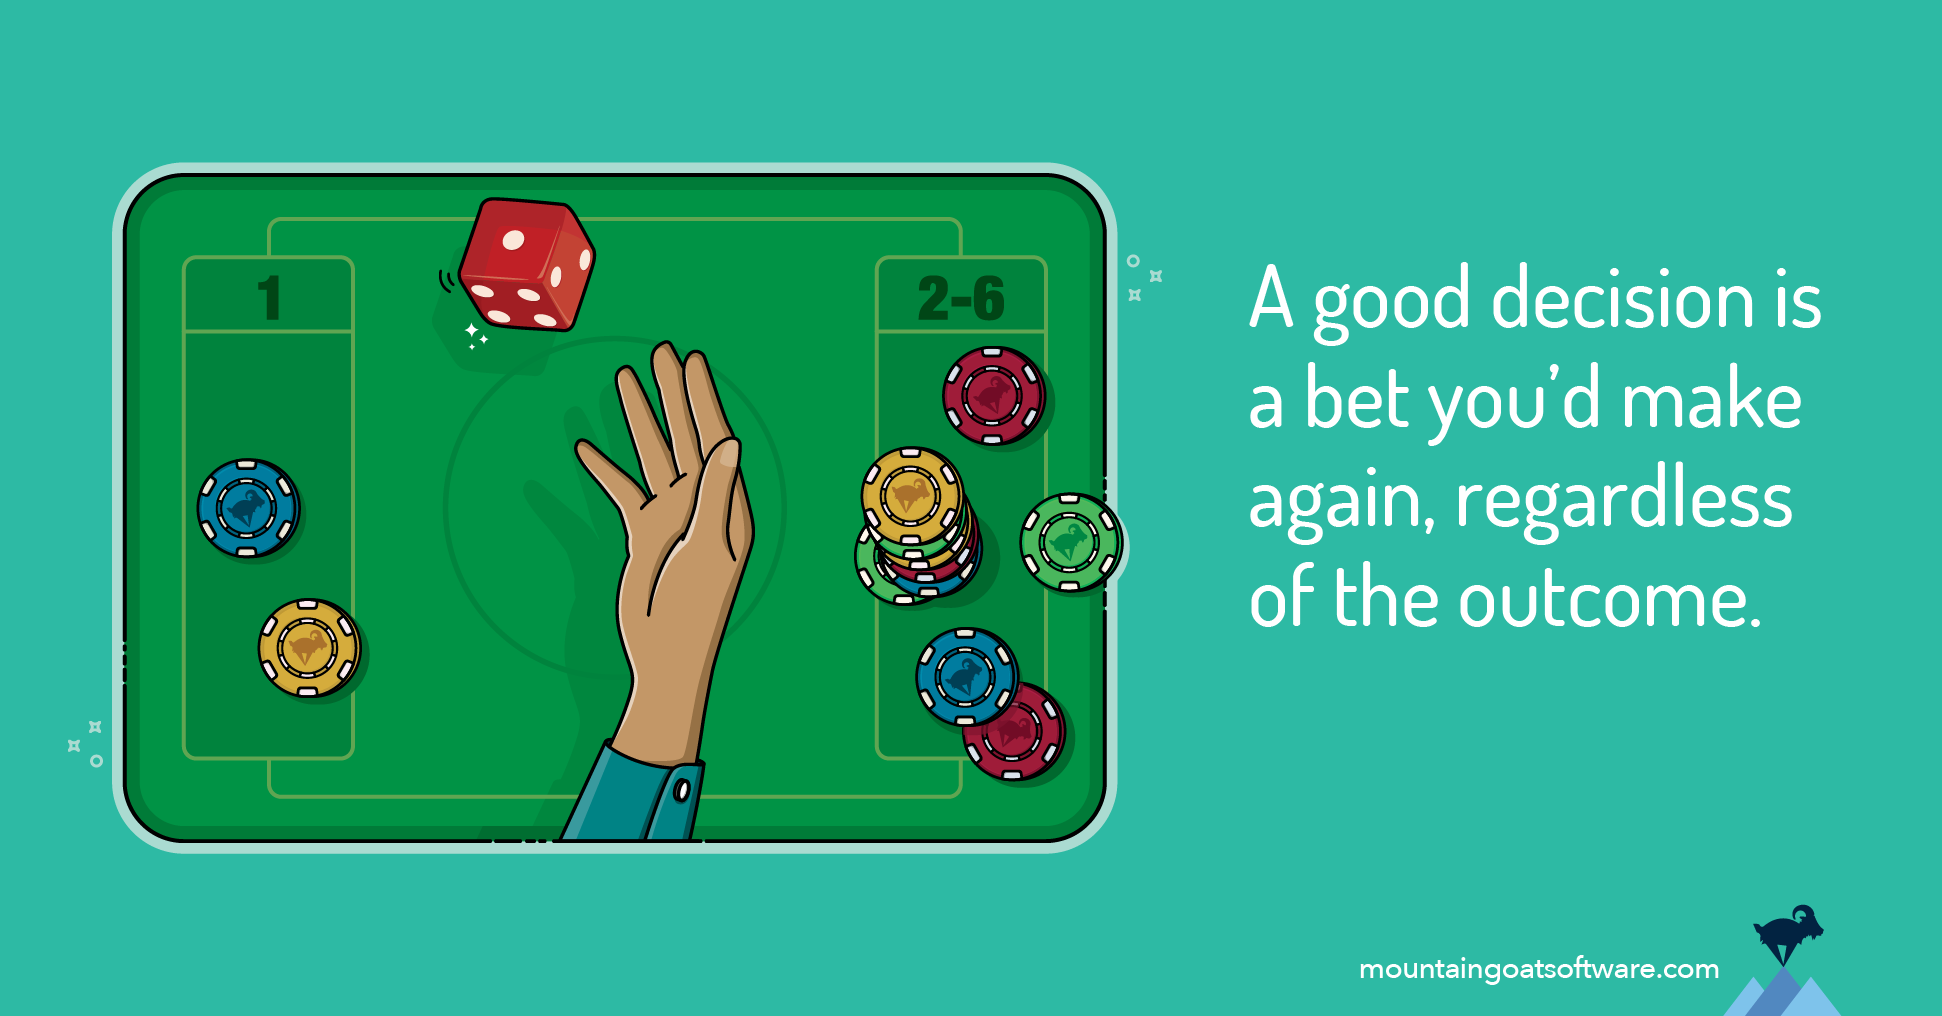 A good decisions is a bet you'd make again, regardless of the outcome. Bets could be made for a single die landing on 1 or landing on 2-6. Most people bet correctly on the choice with the best odds (2-6) but the die lands on 1.